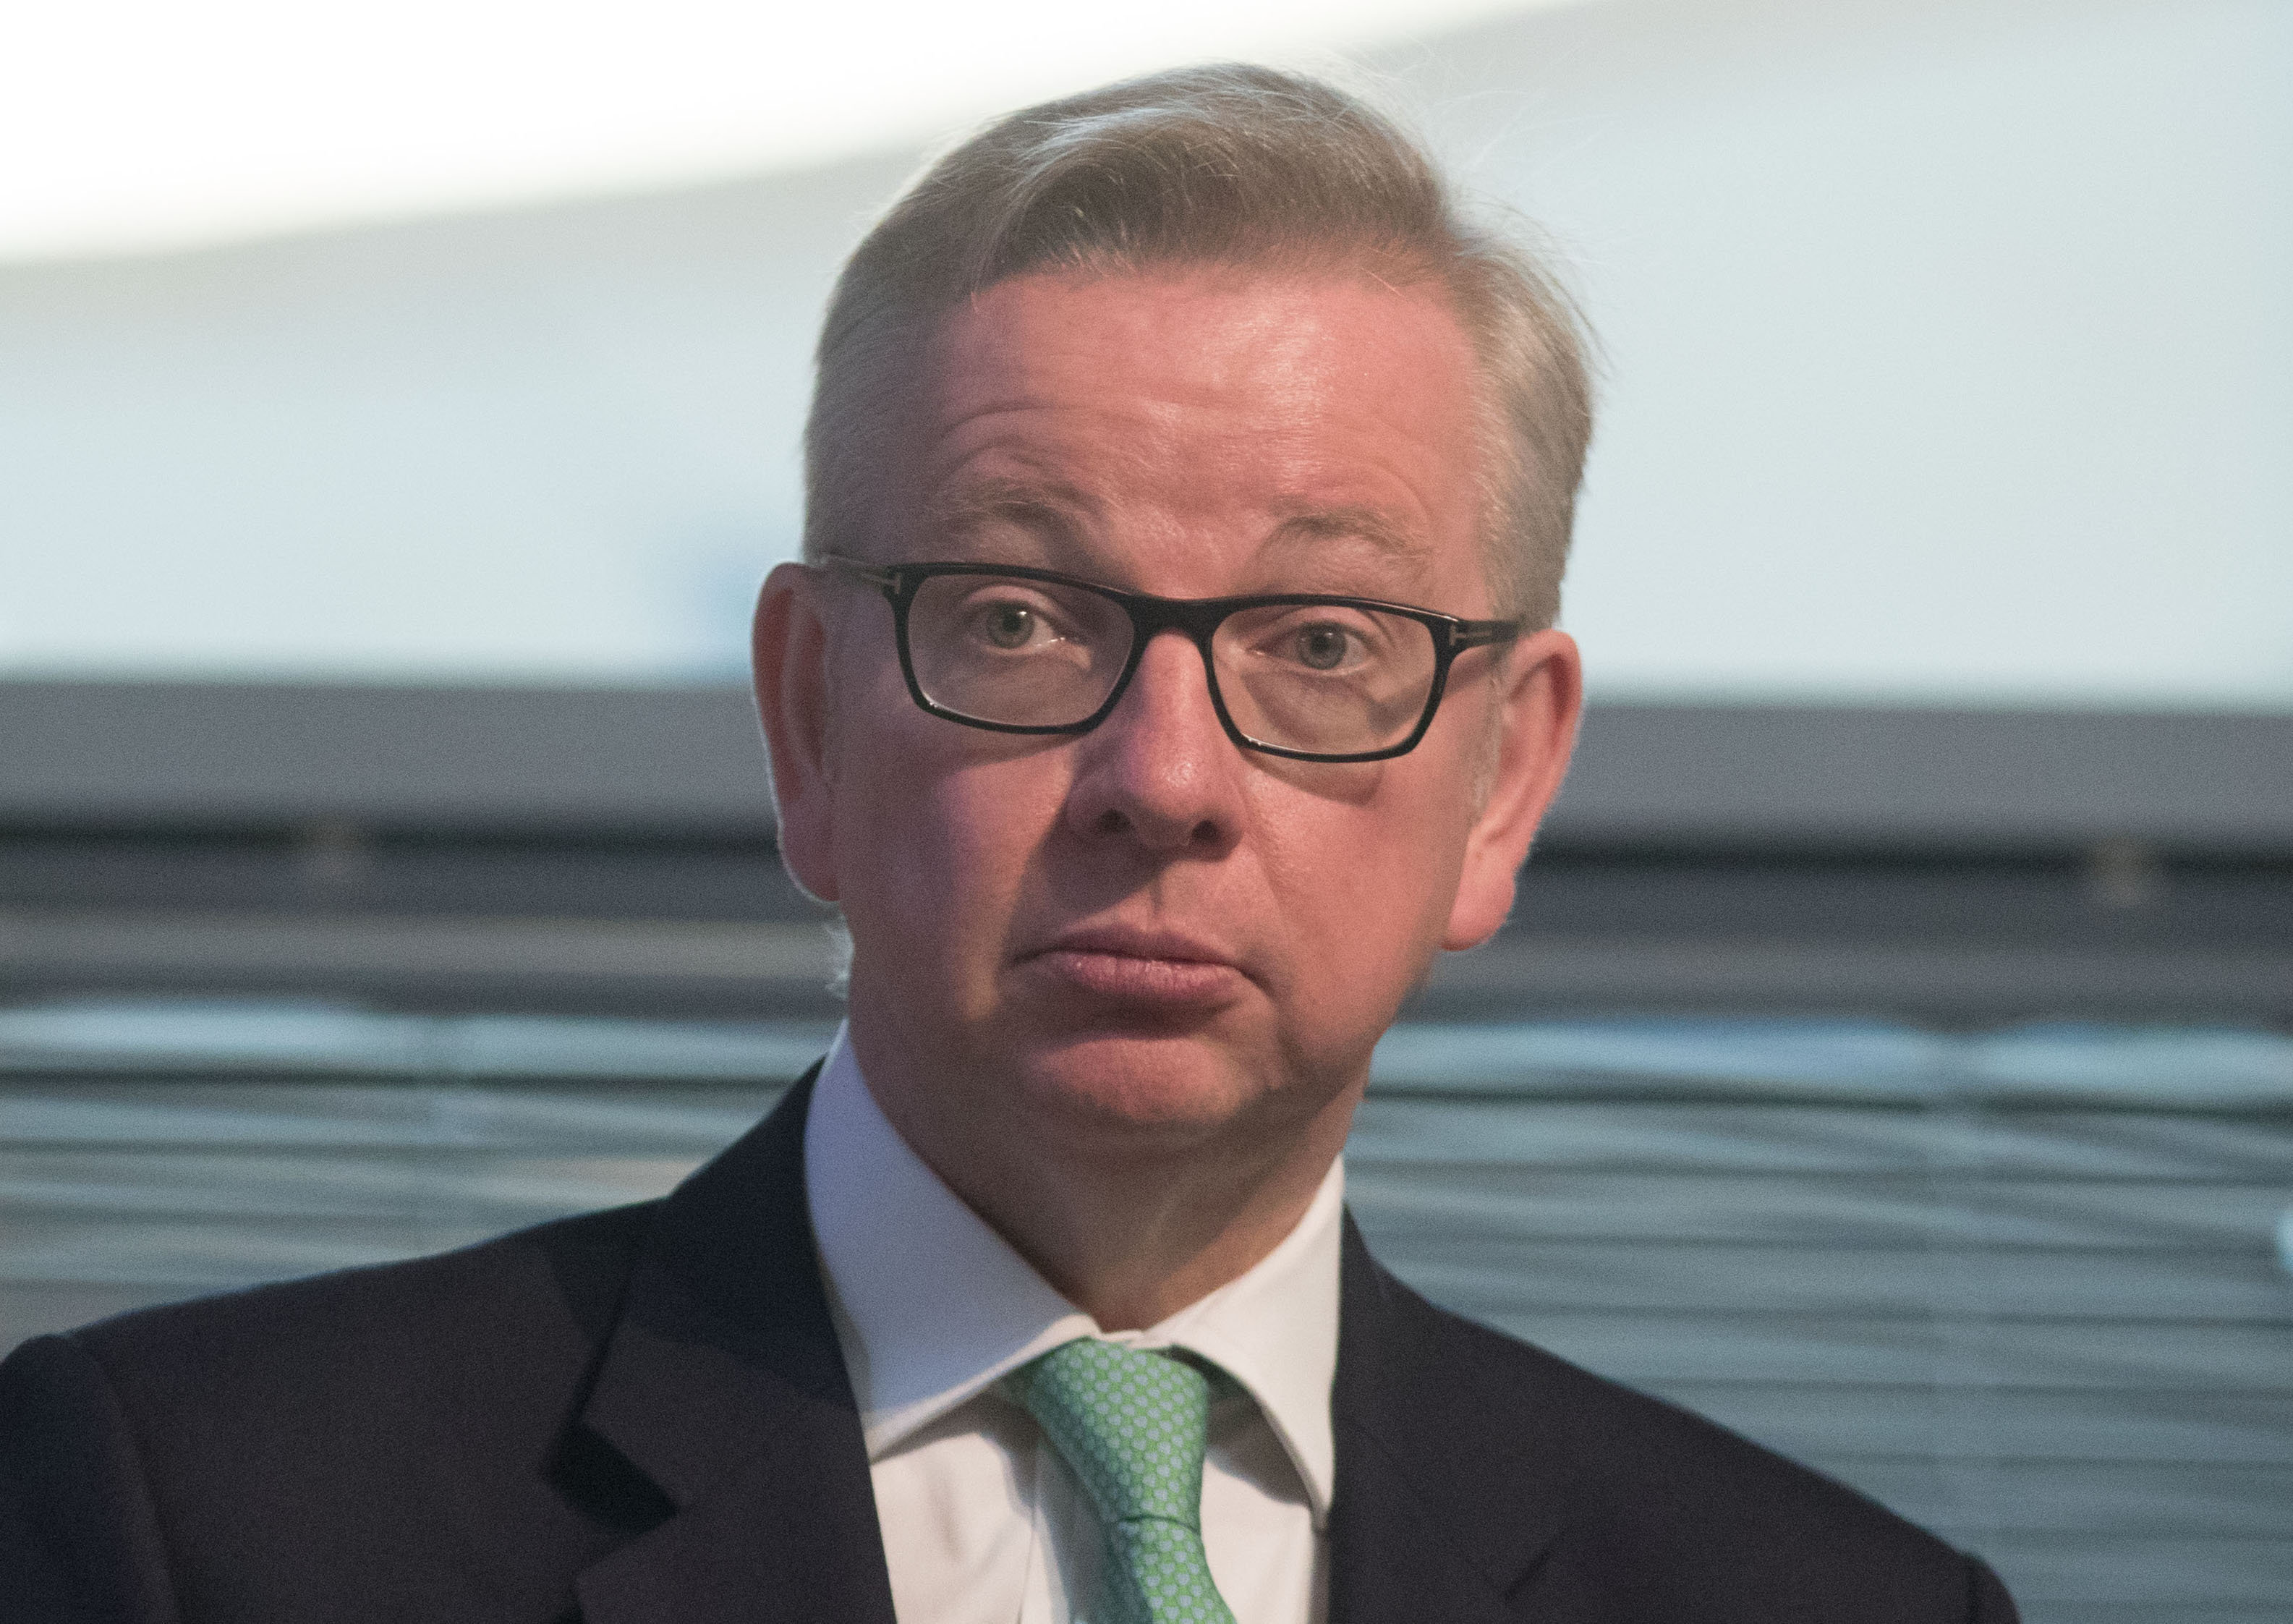 Michael Gove said the 'British people' would be 'in control' of any Brexit deal' 